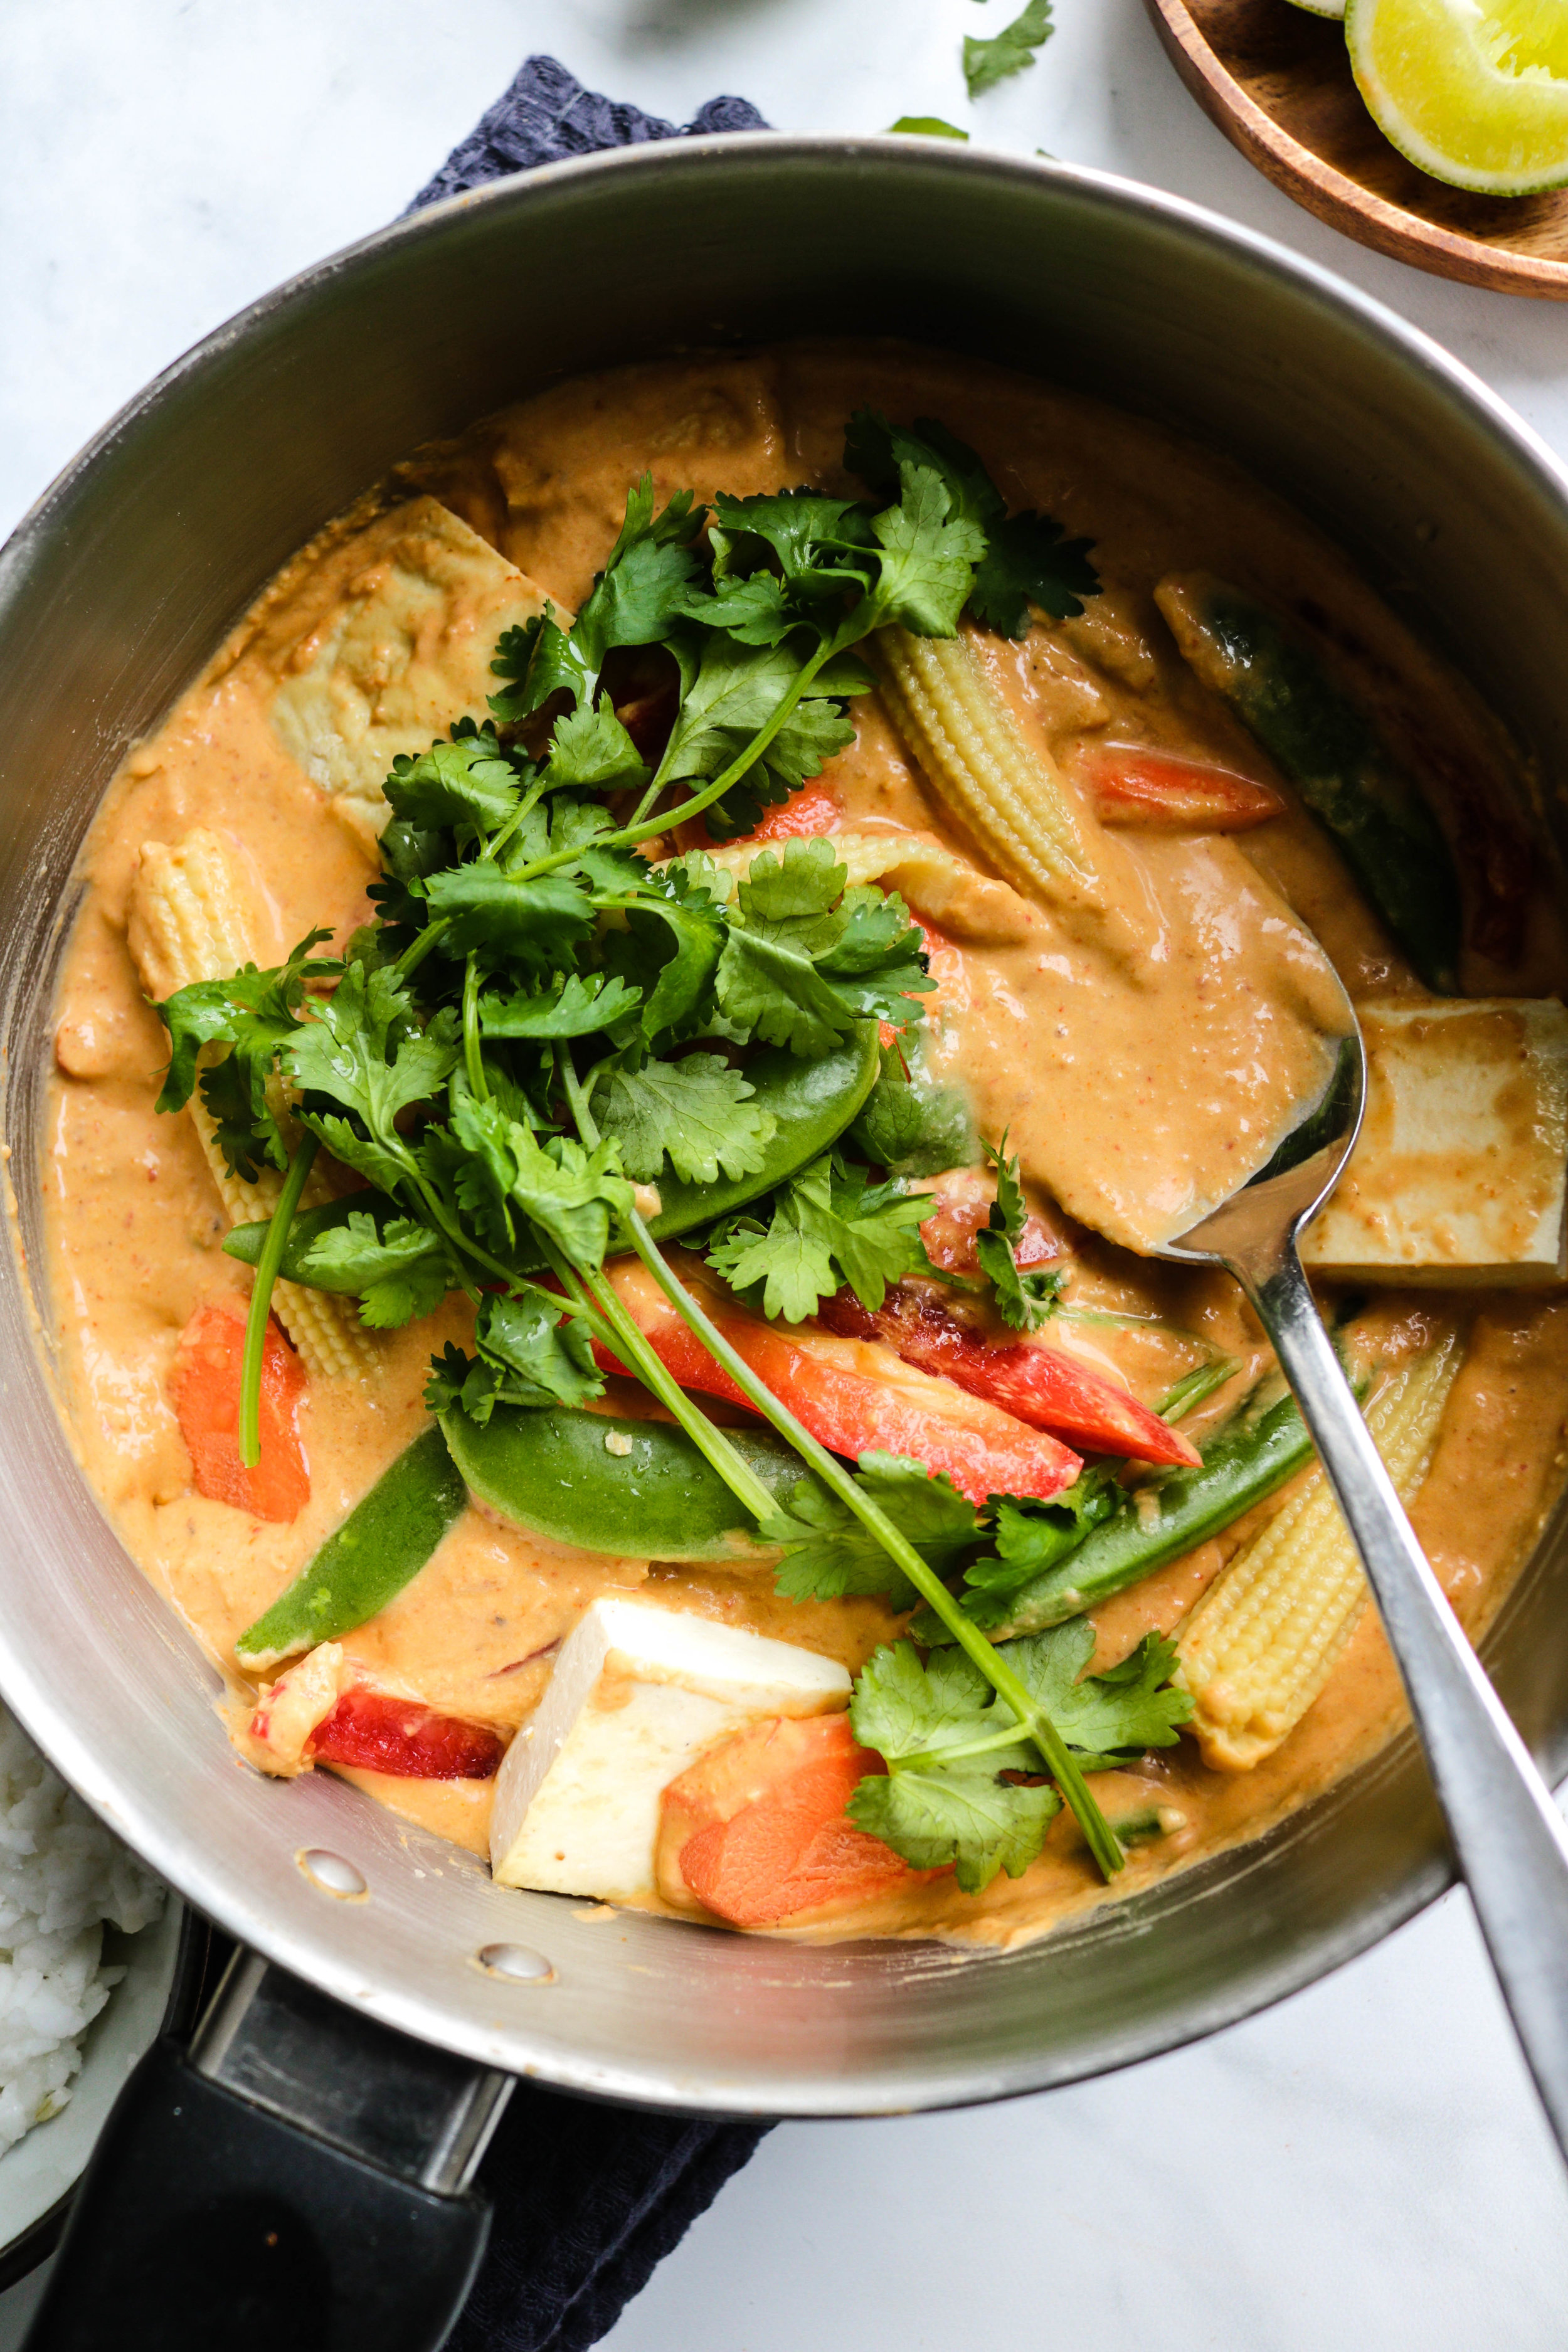 Vegan Red Thai Coconut Curry (with Pureed Chickpeas) - Okonomi Kitchen